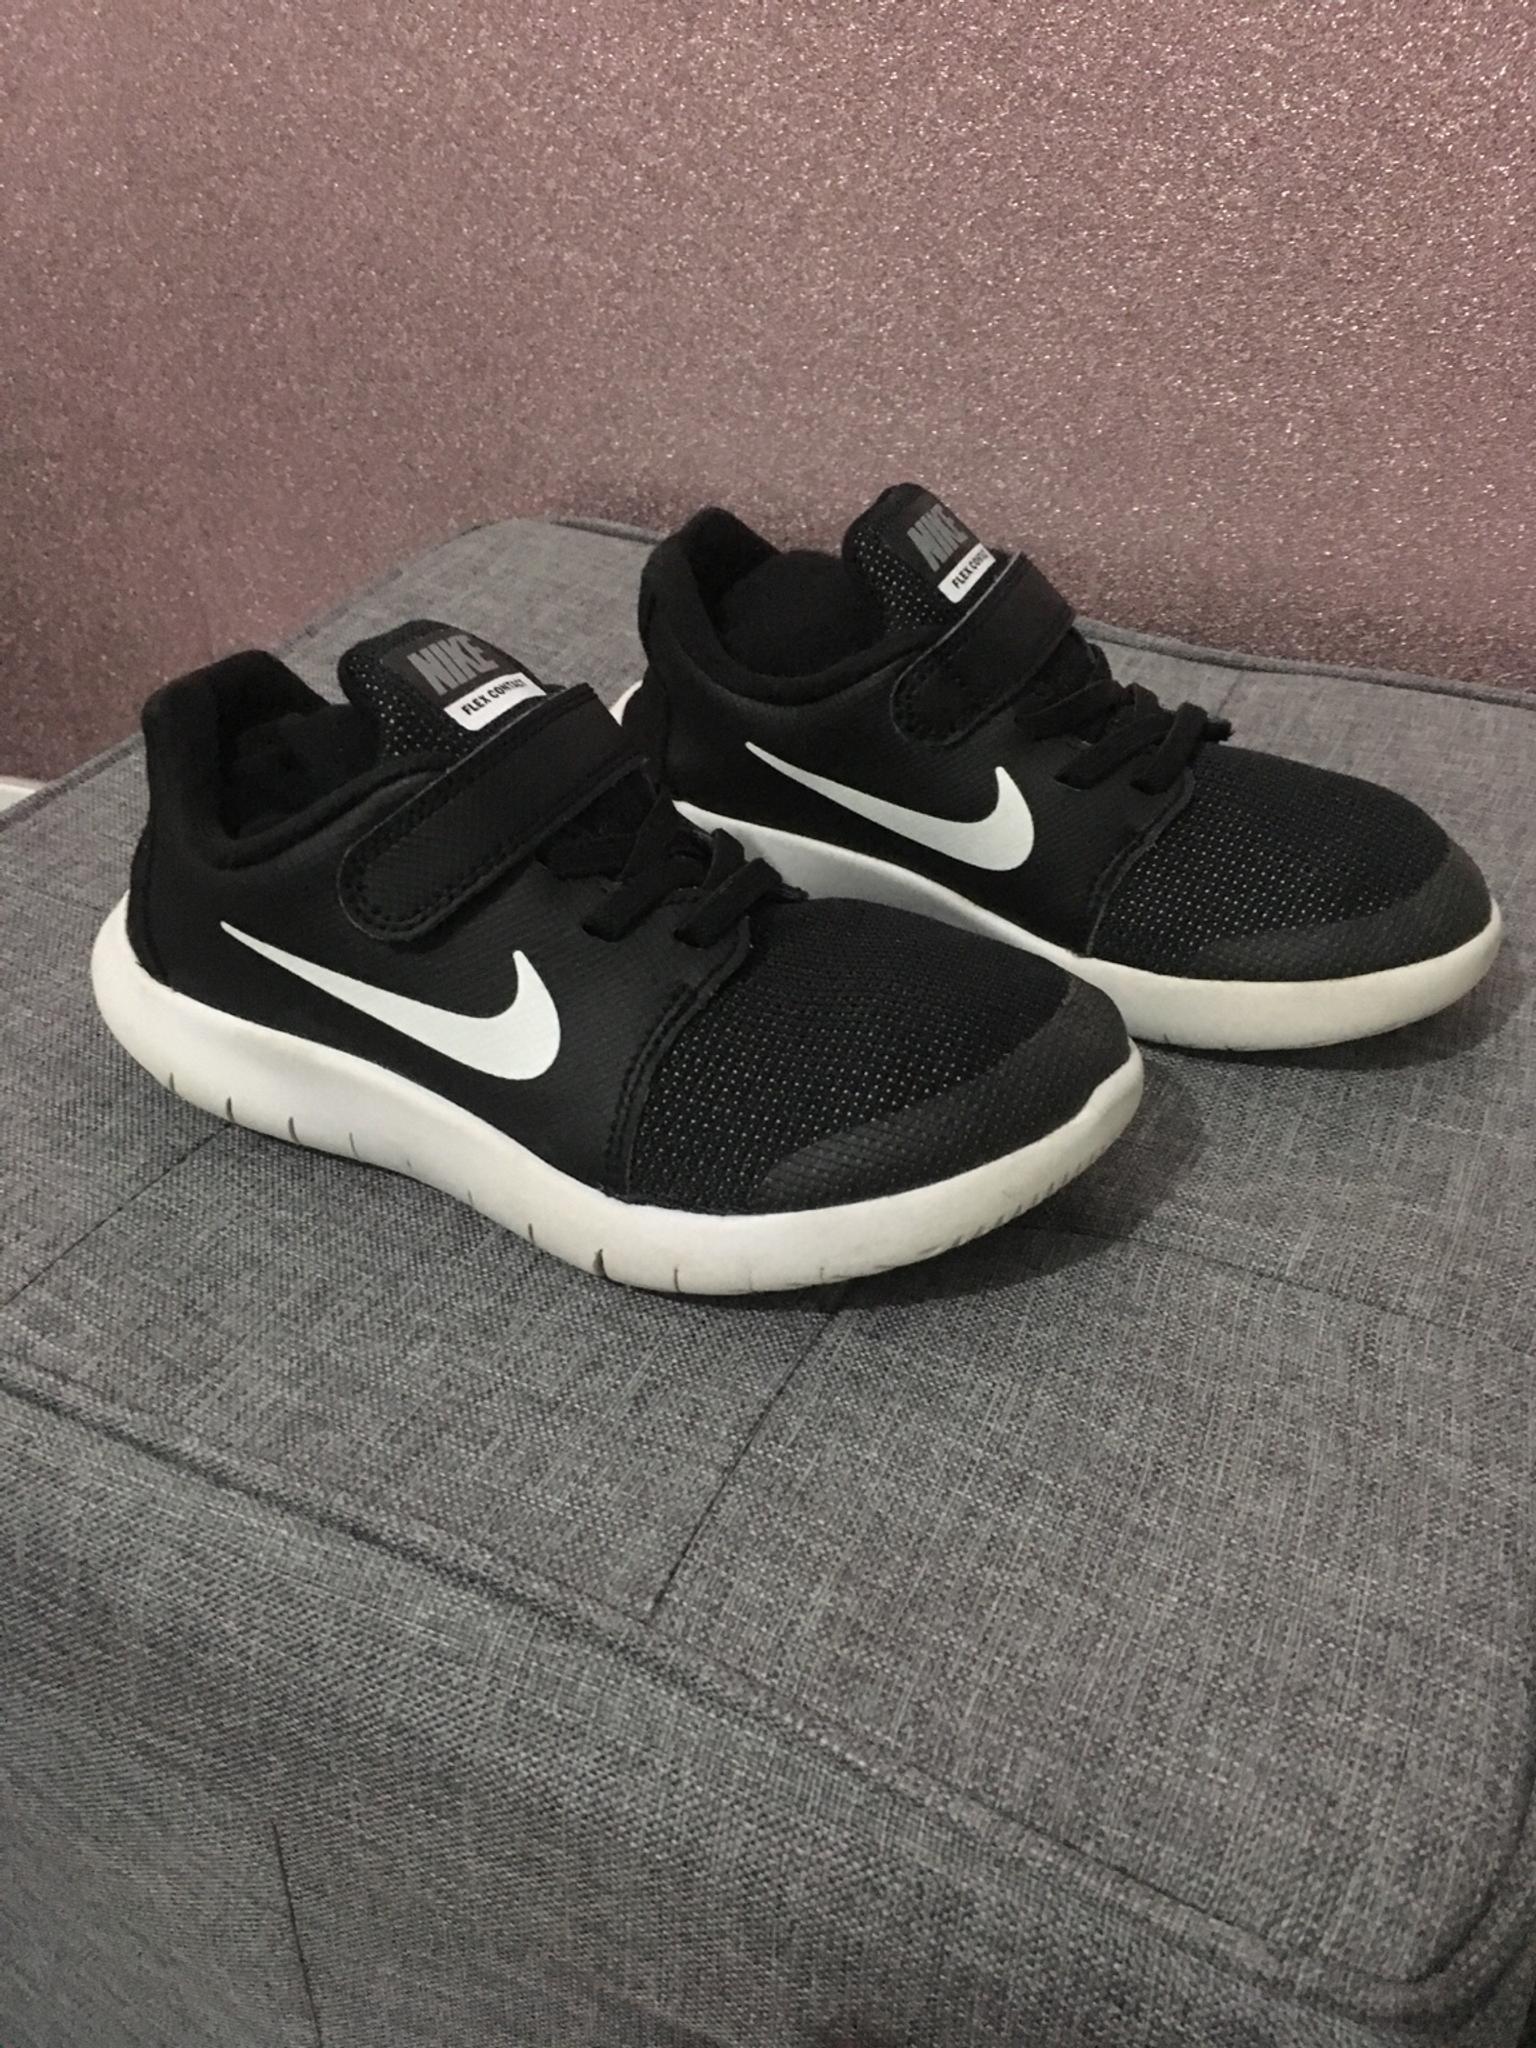 black nike with white sole